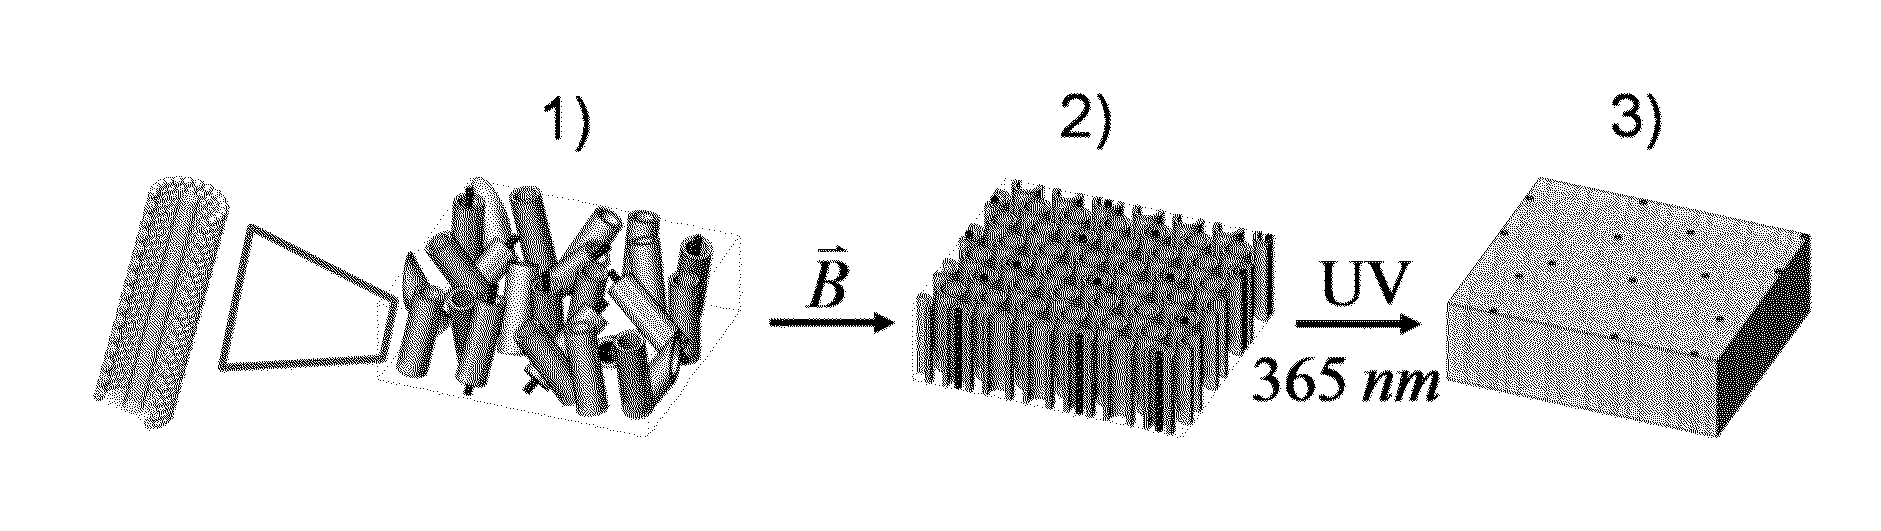 Polymeric Composites Having Oriented Nanomaterials and Methods of Making the Same